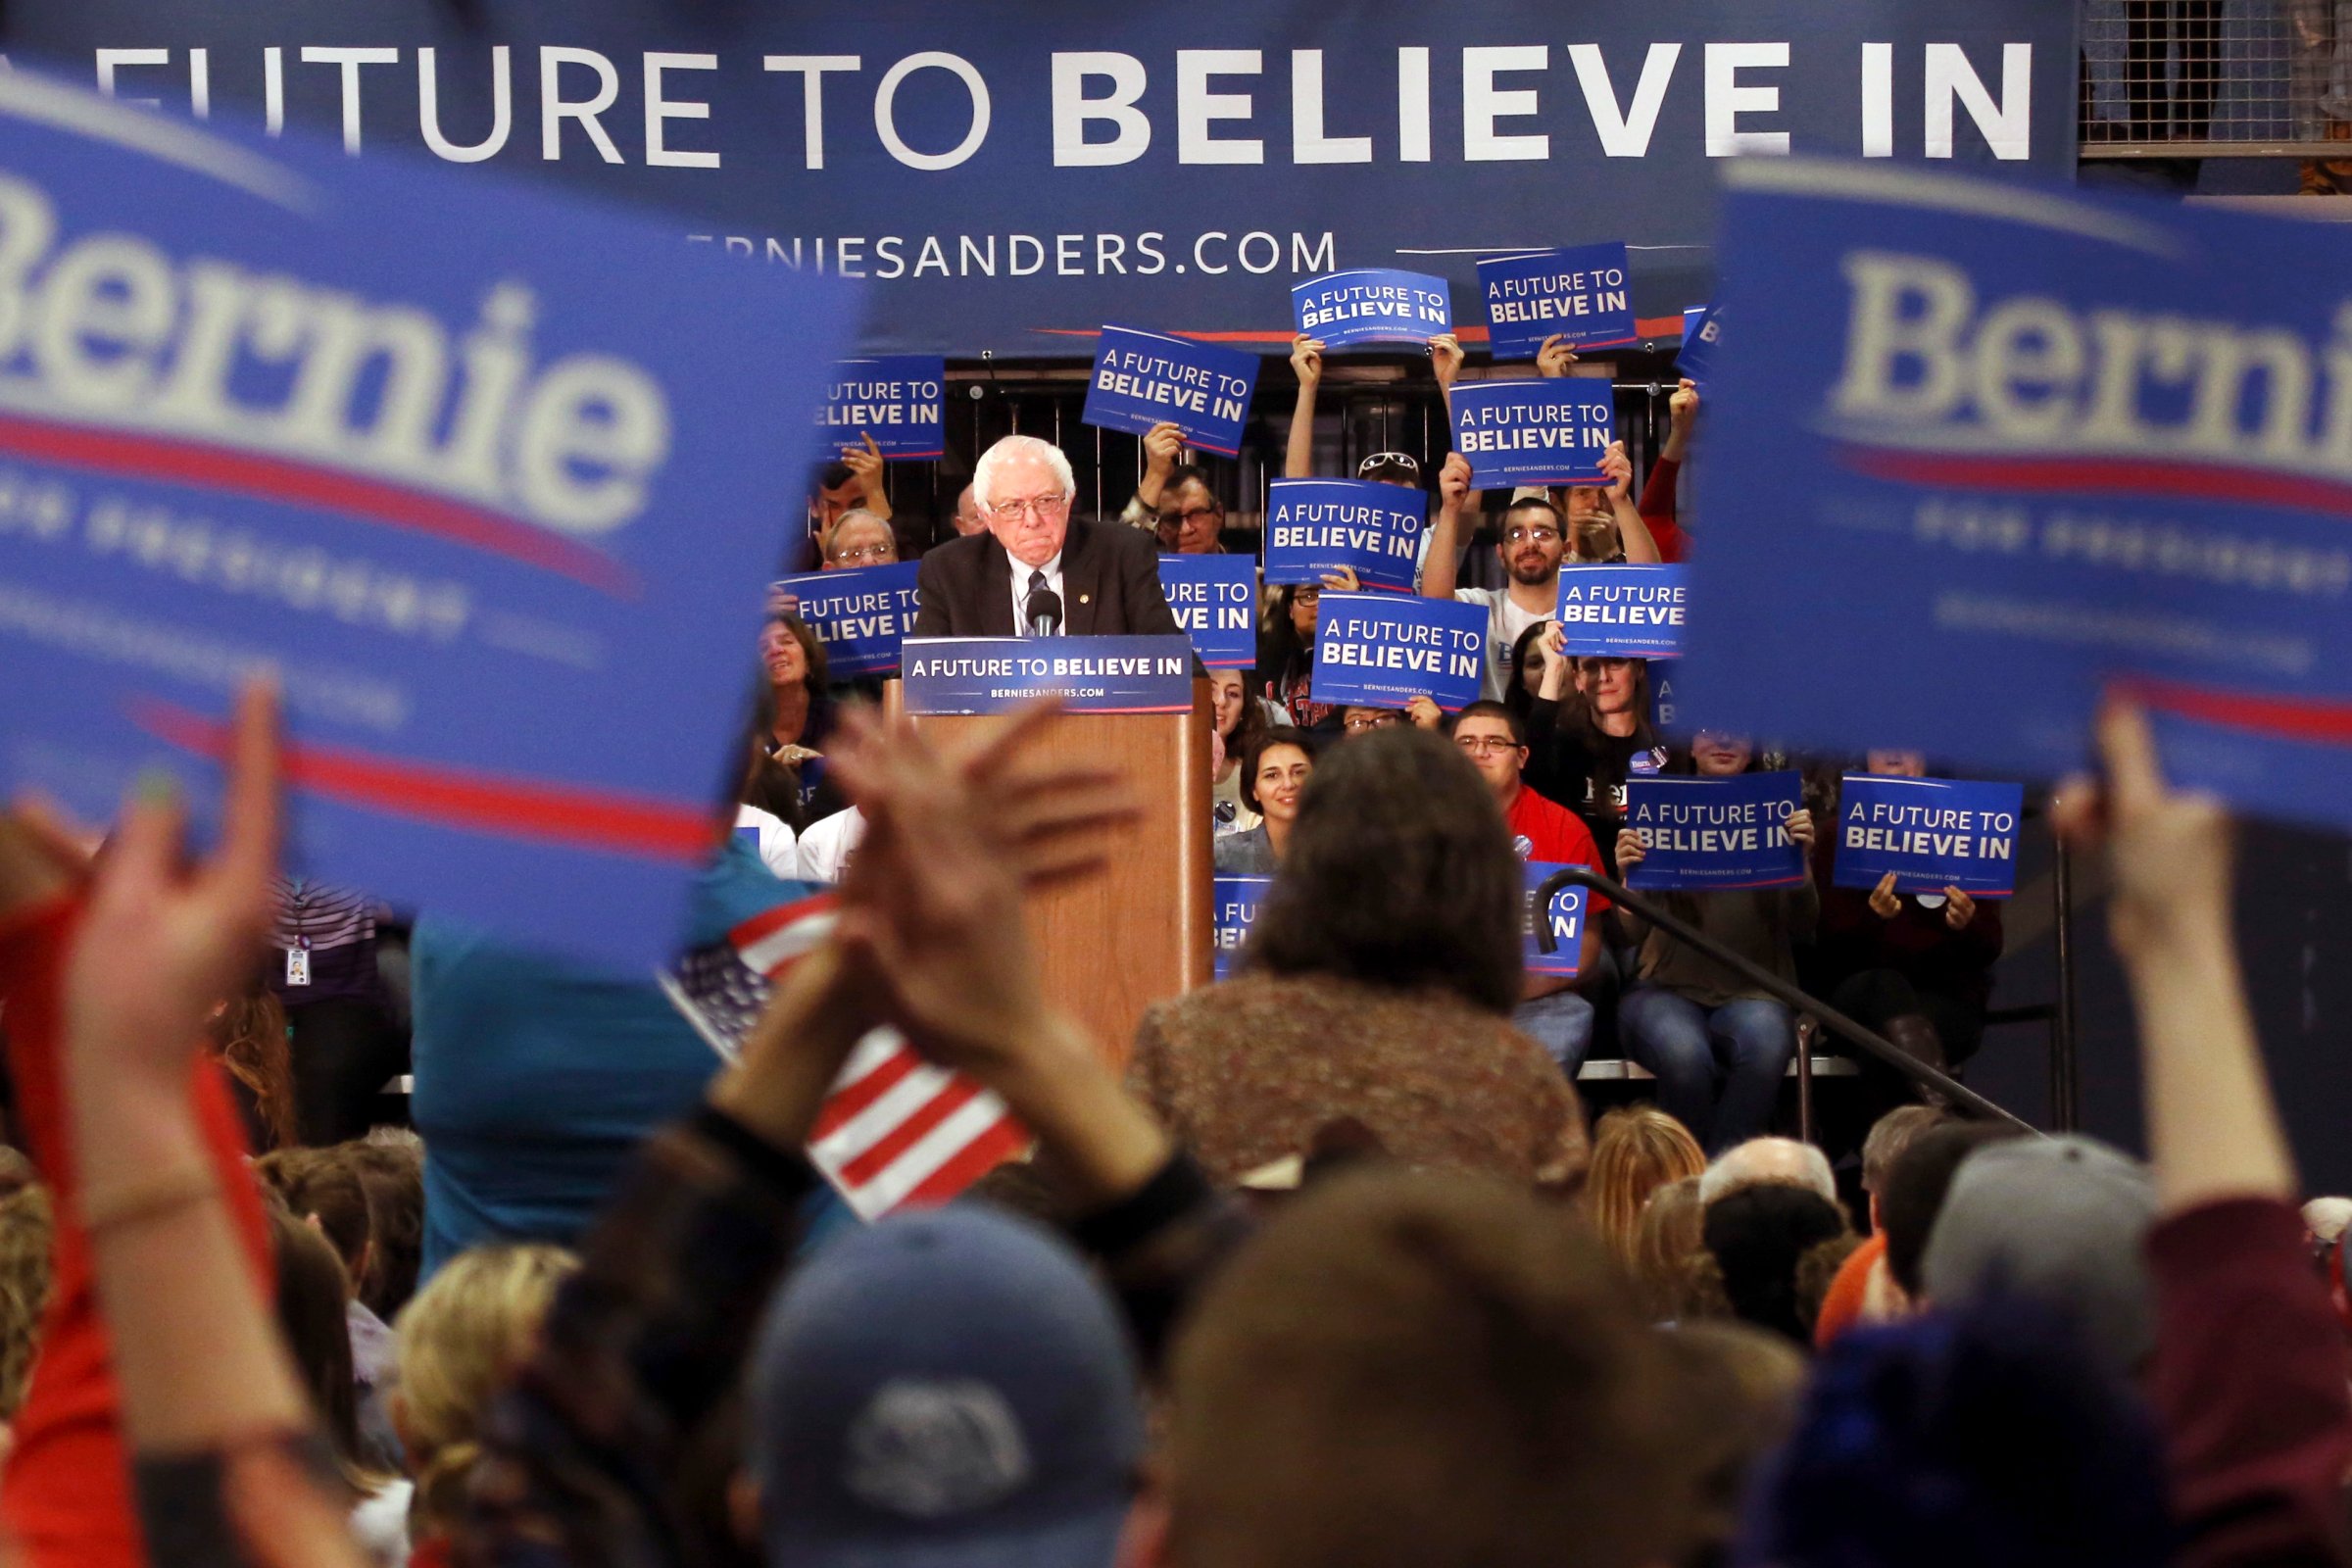 Supporters cheer as Democratic presidential candidate Sen. Bernie Sanders, I-Vt., speaks during a campaign stop on Jan. 4, 2016, in Manchester, N.H.